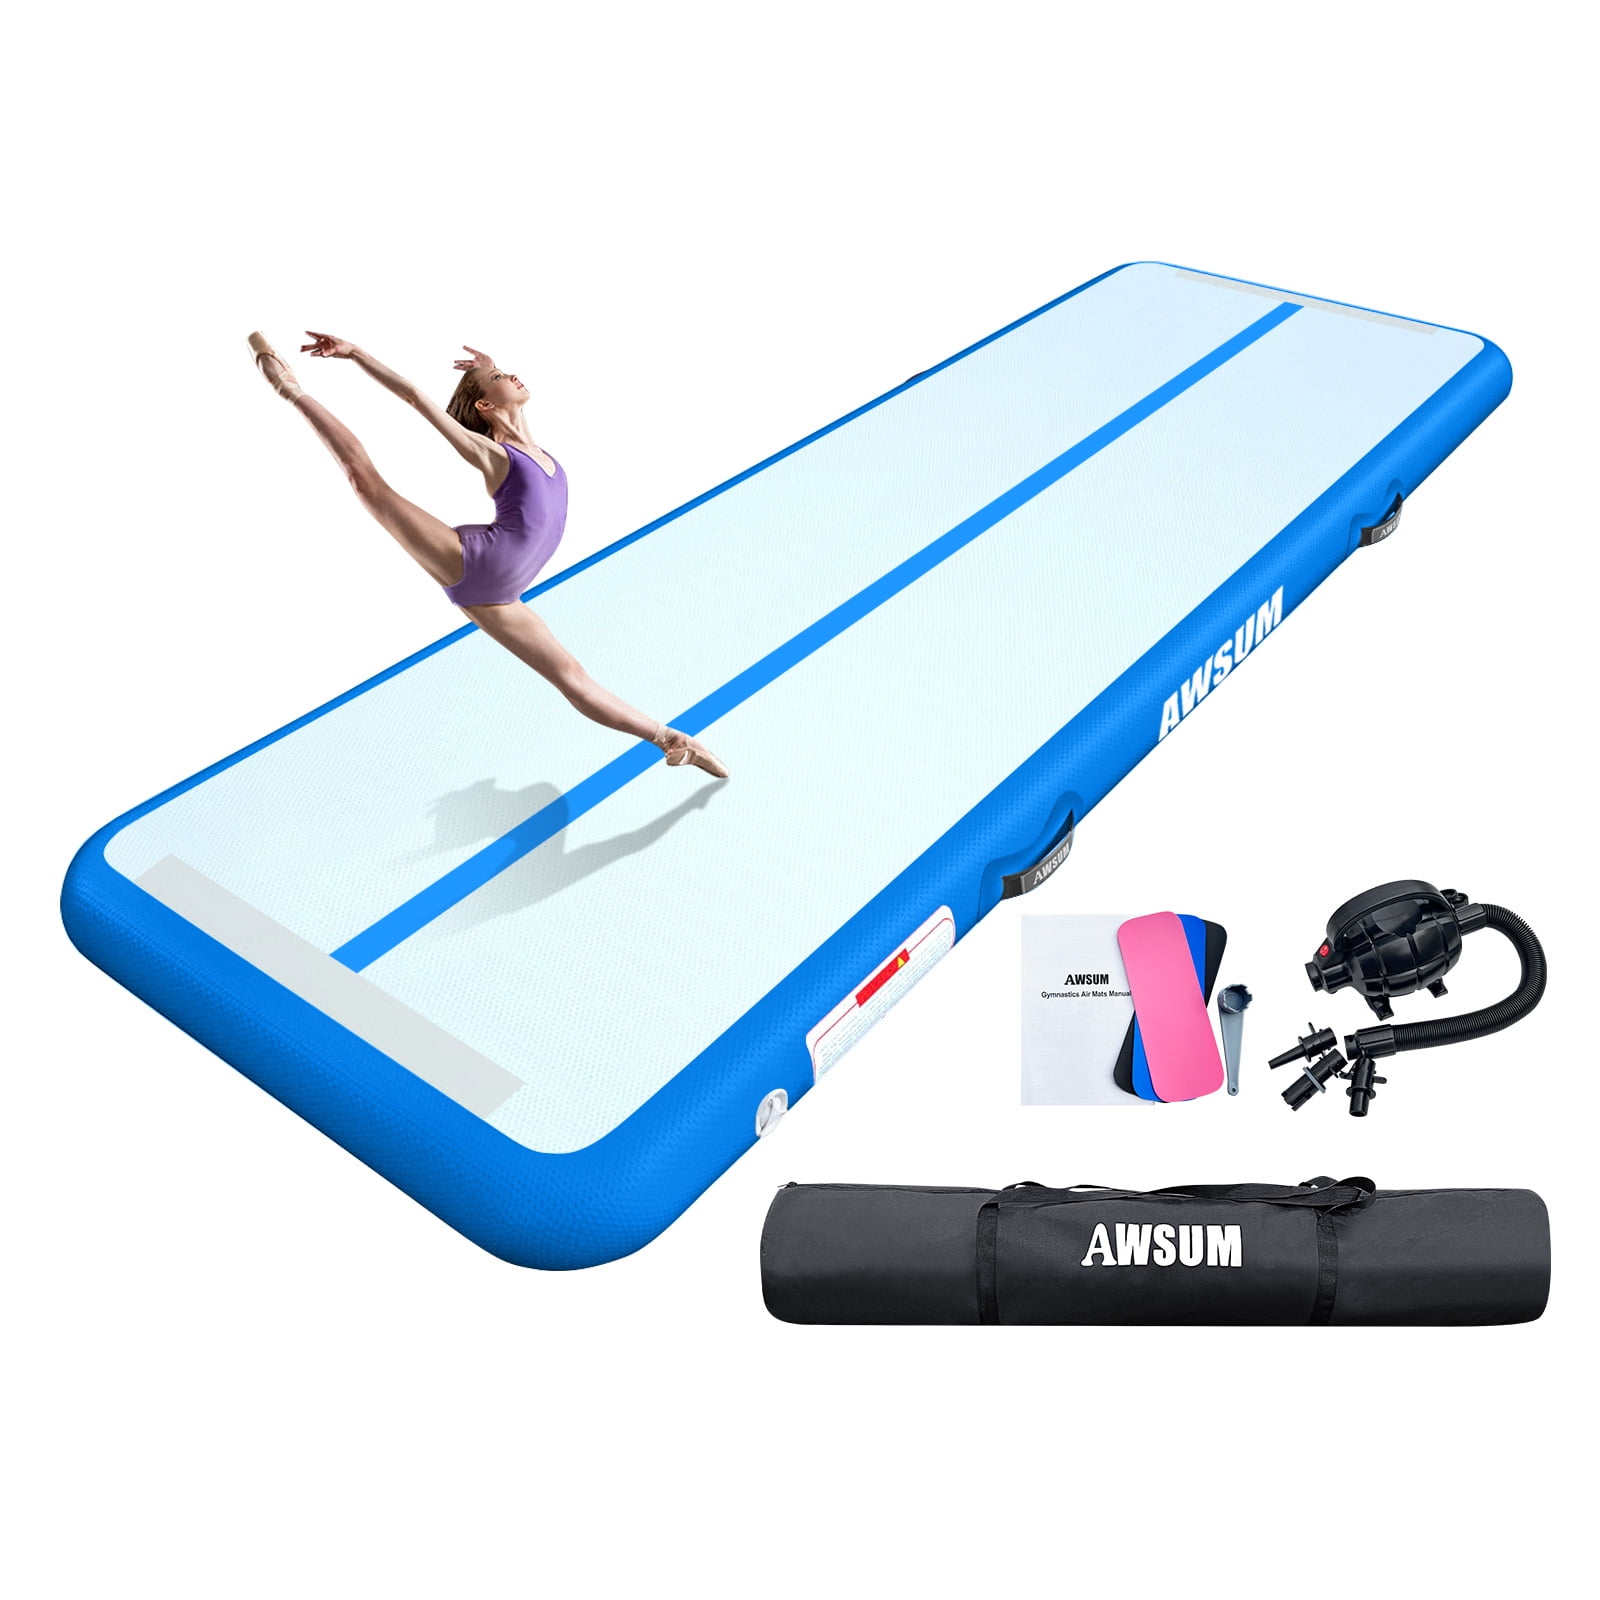 AWSUM Inflatable Air Gymnastics Mat 10ft 13ft 16ft Training mat 4 inches  Thick tumbling mat with Electric Pump for Home/Gym